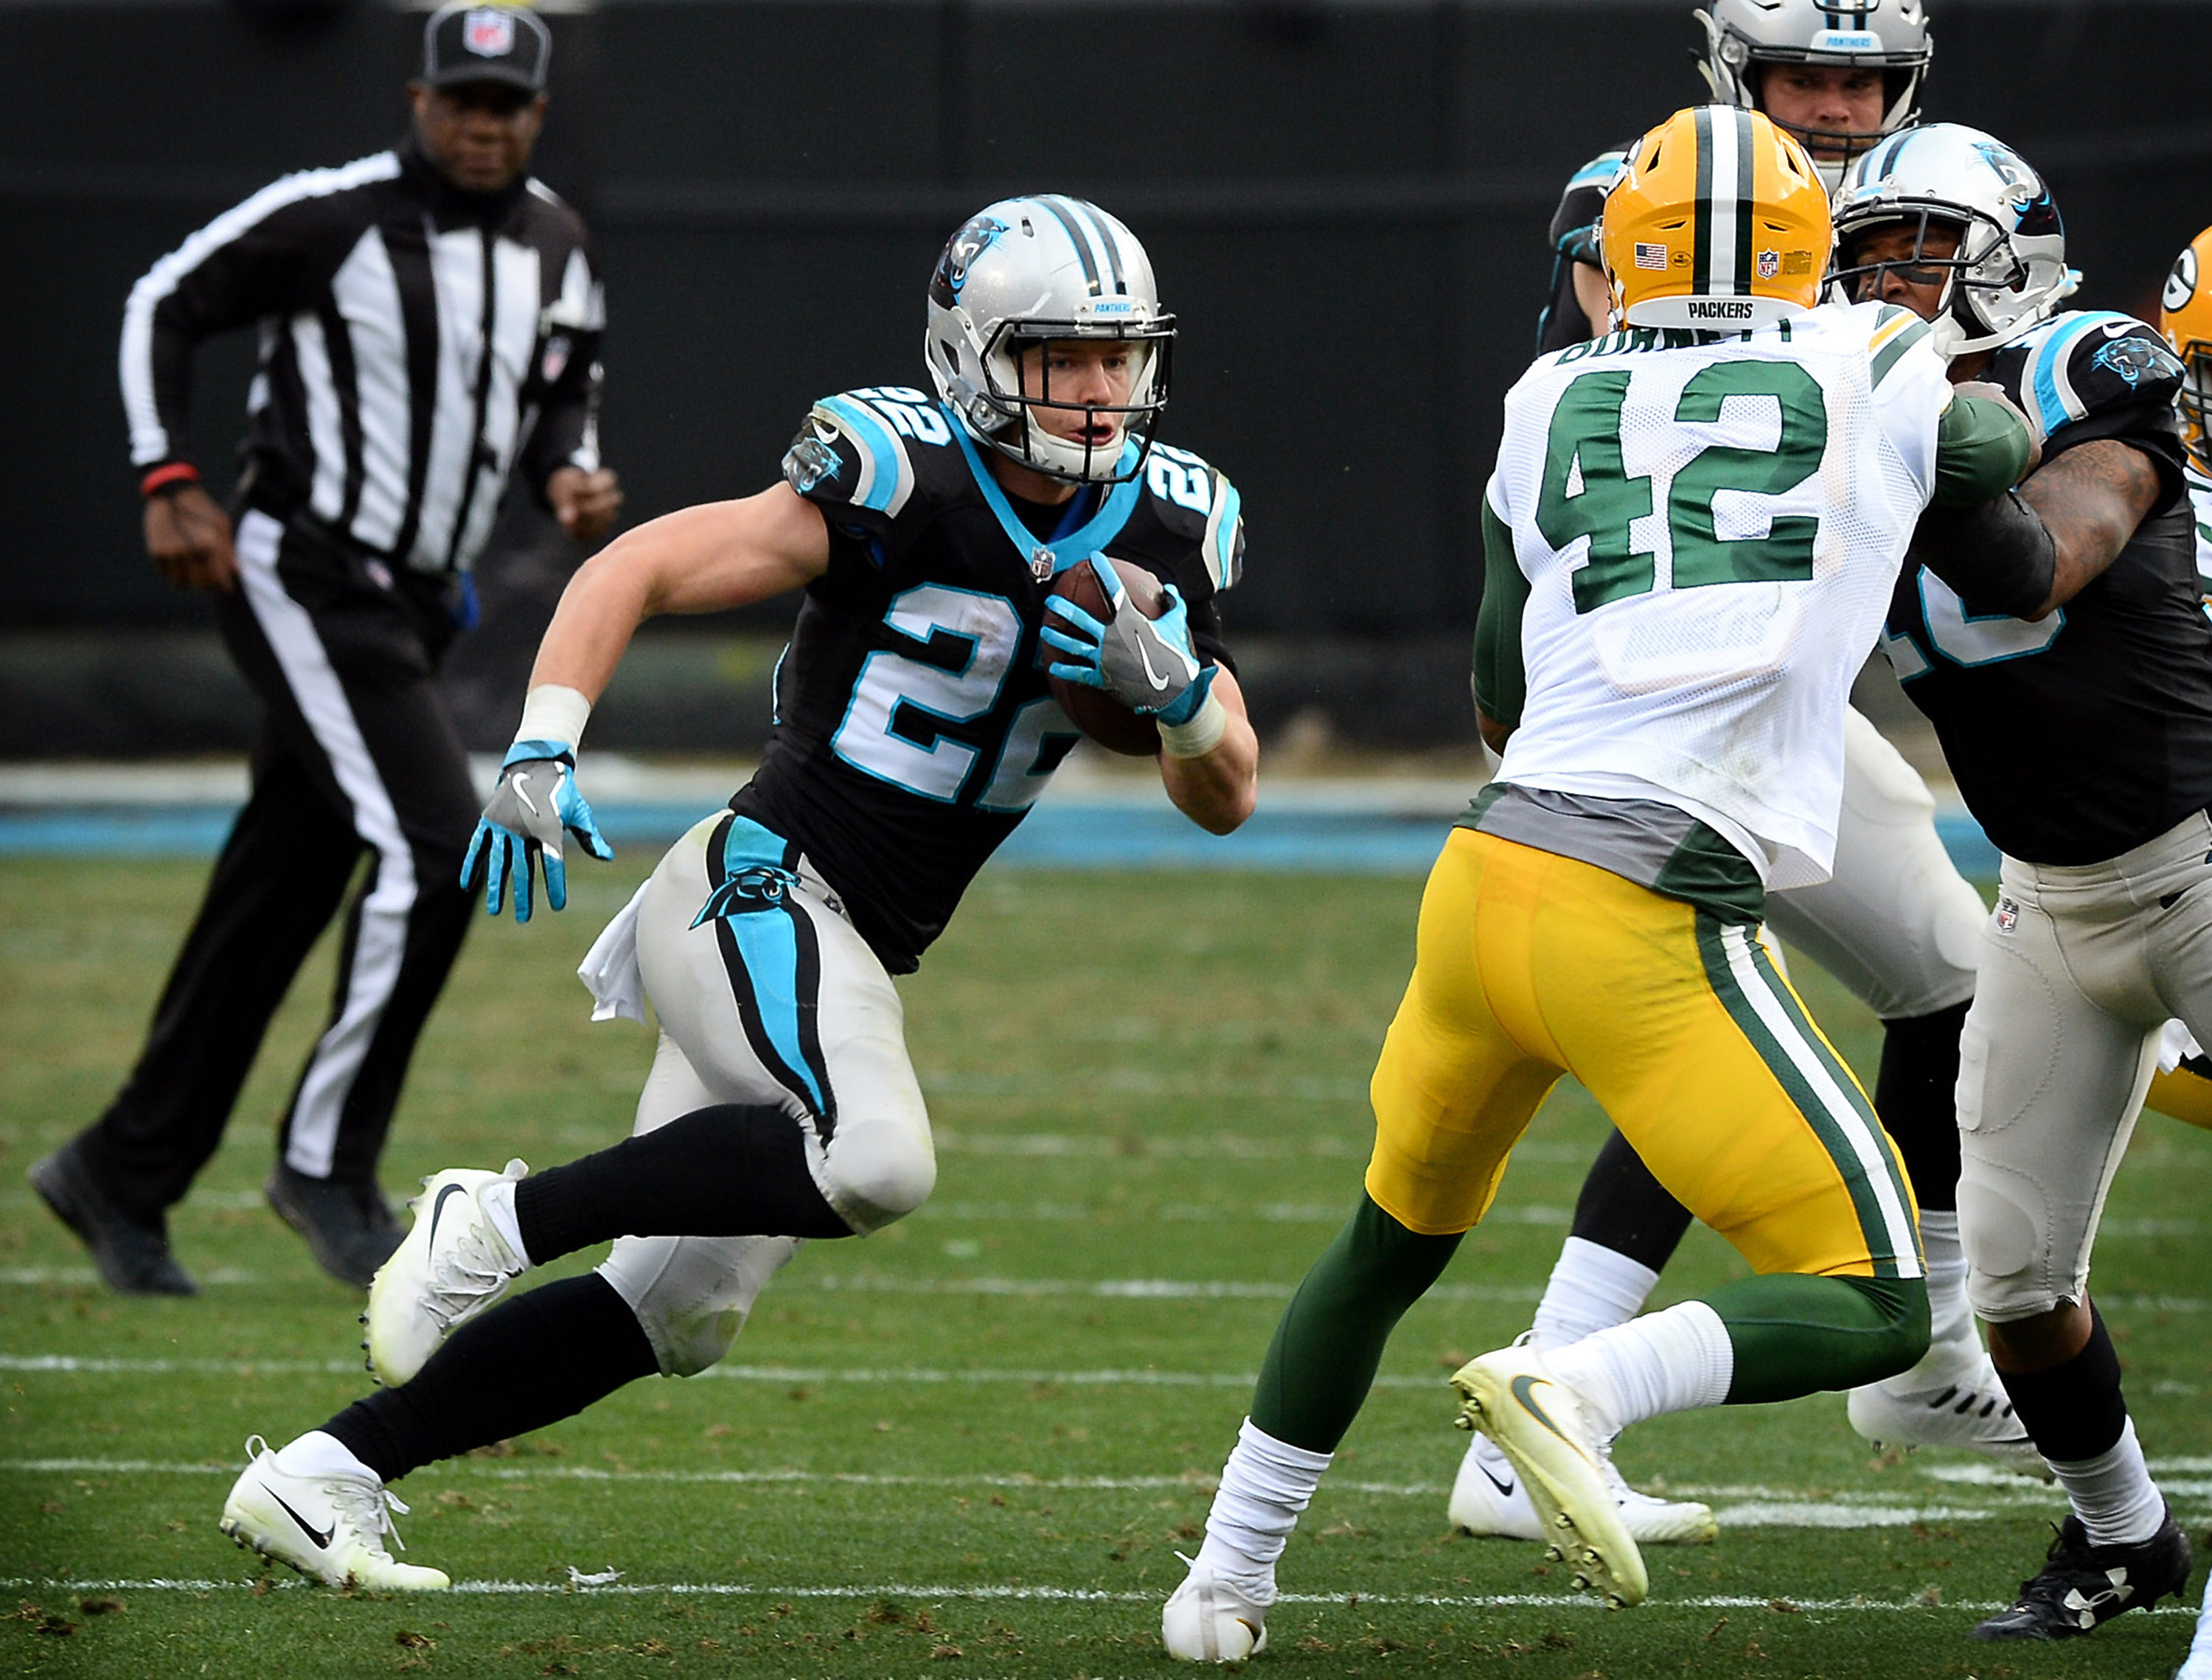 How Panthersâ Christian McCaffrey is powering through NFLâs rookie wall